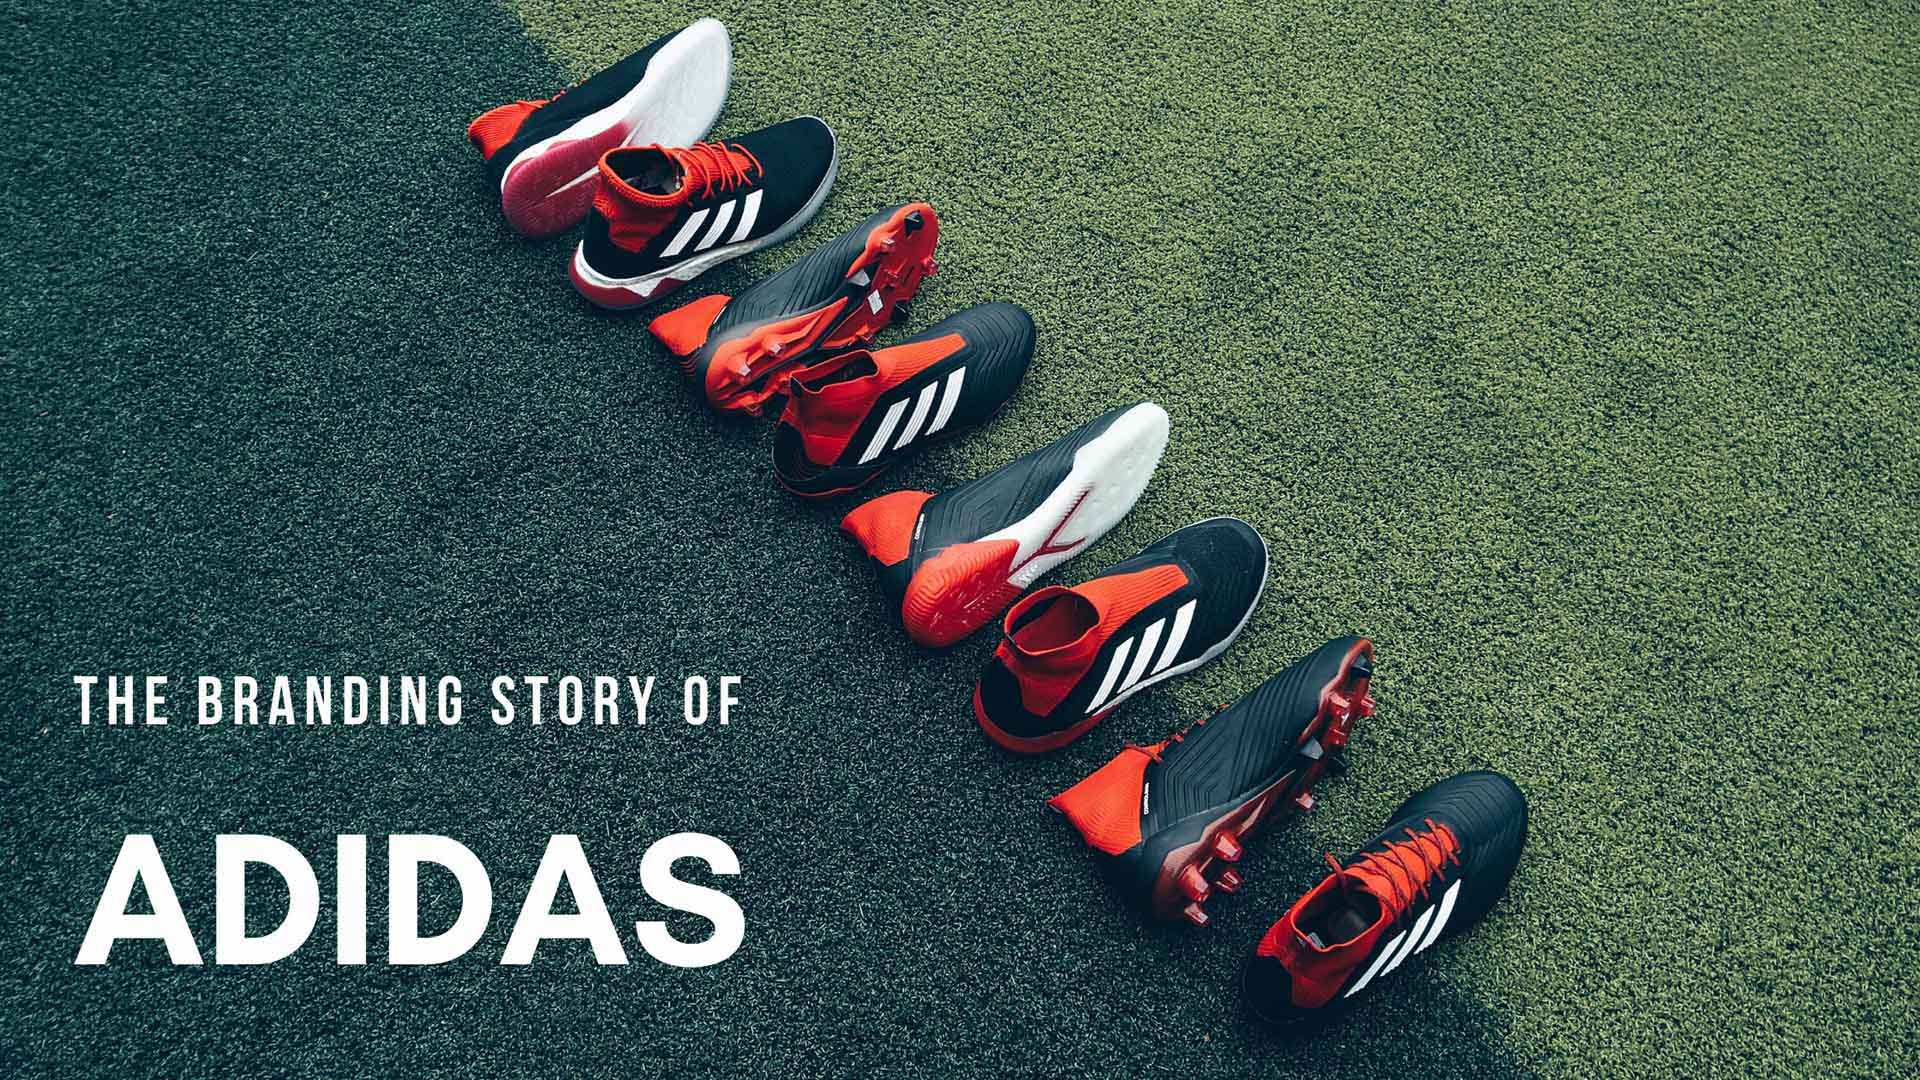 Adidas: Branding Campaigns, Logos, and History Approval Studio